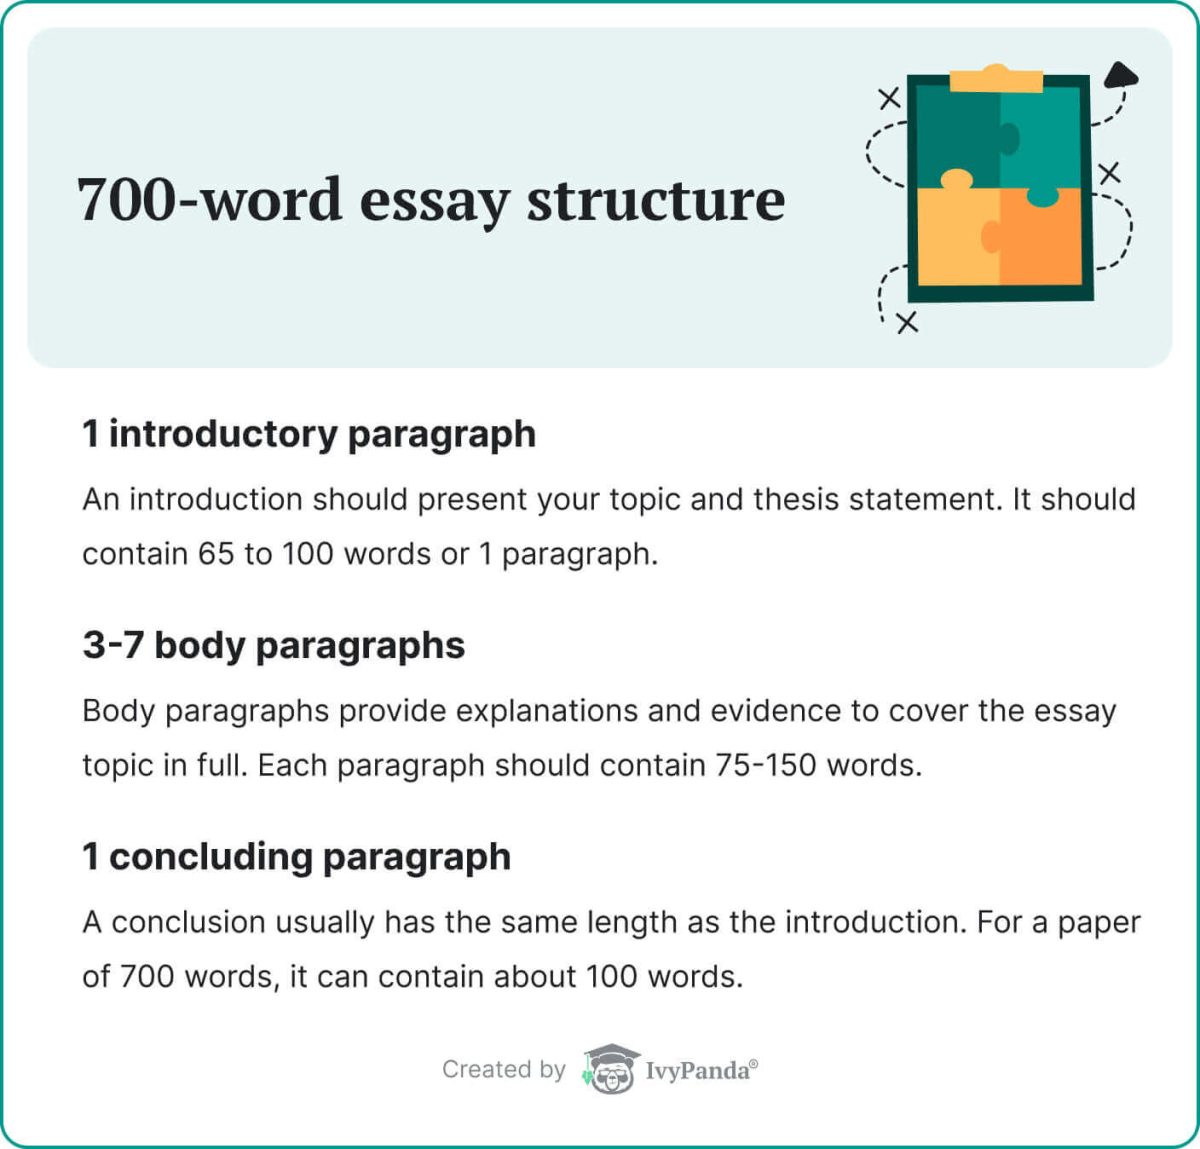 This image shows the 700-word essay structure.